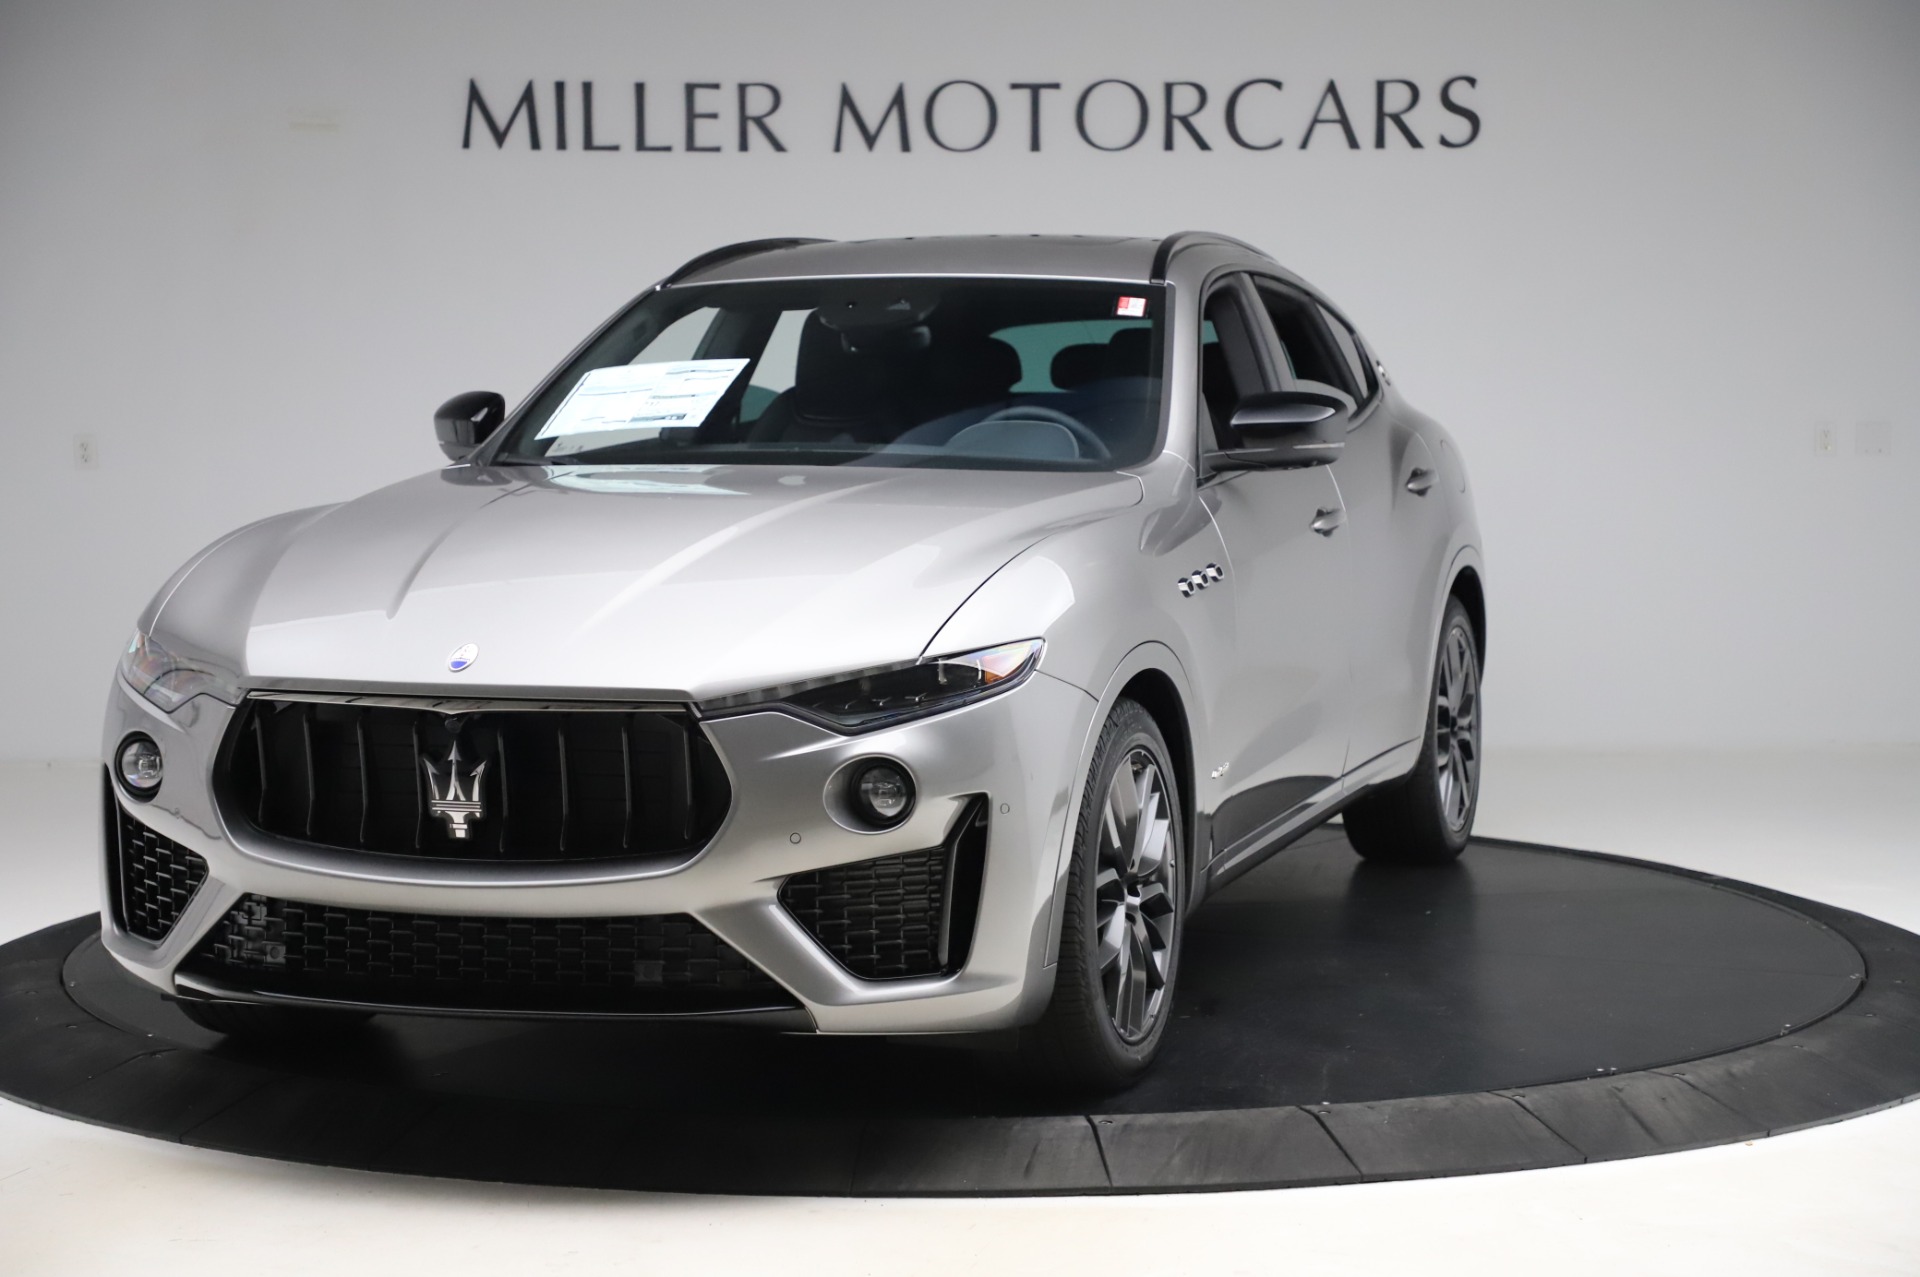 New 2020 Maserati Levante Q4 GranSport for sale Sold at Bentley Greenwich in Greenwich CT 06830 1